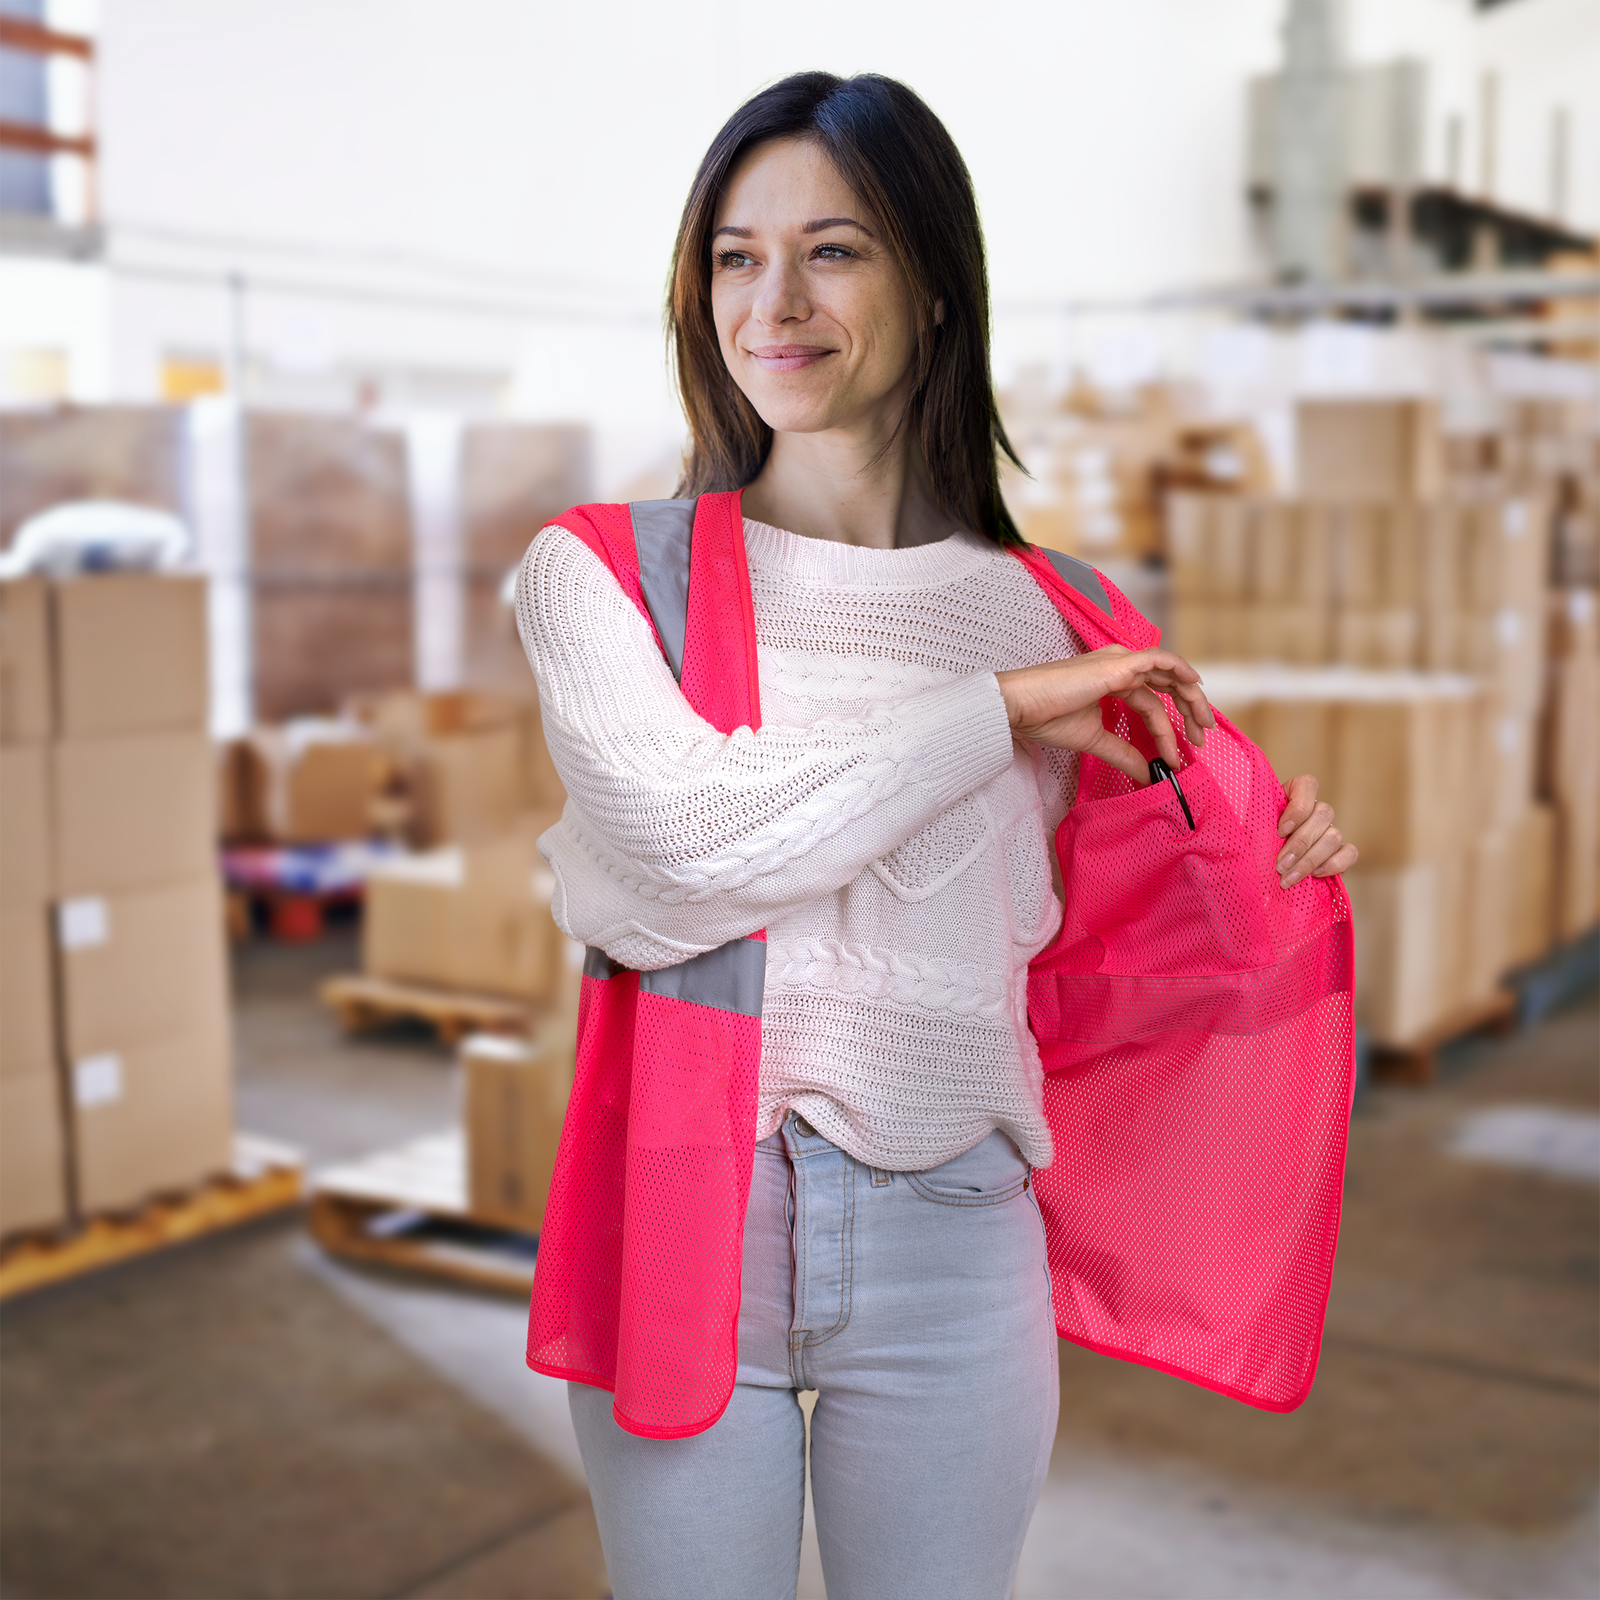 Woman wearing a High visibility pink safety vest inside a space filled with boxes